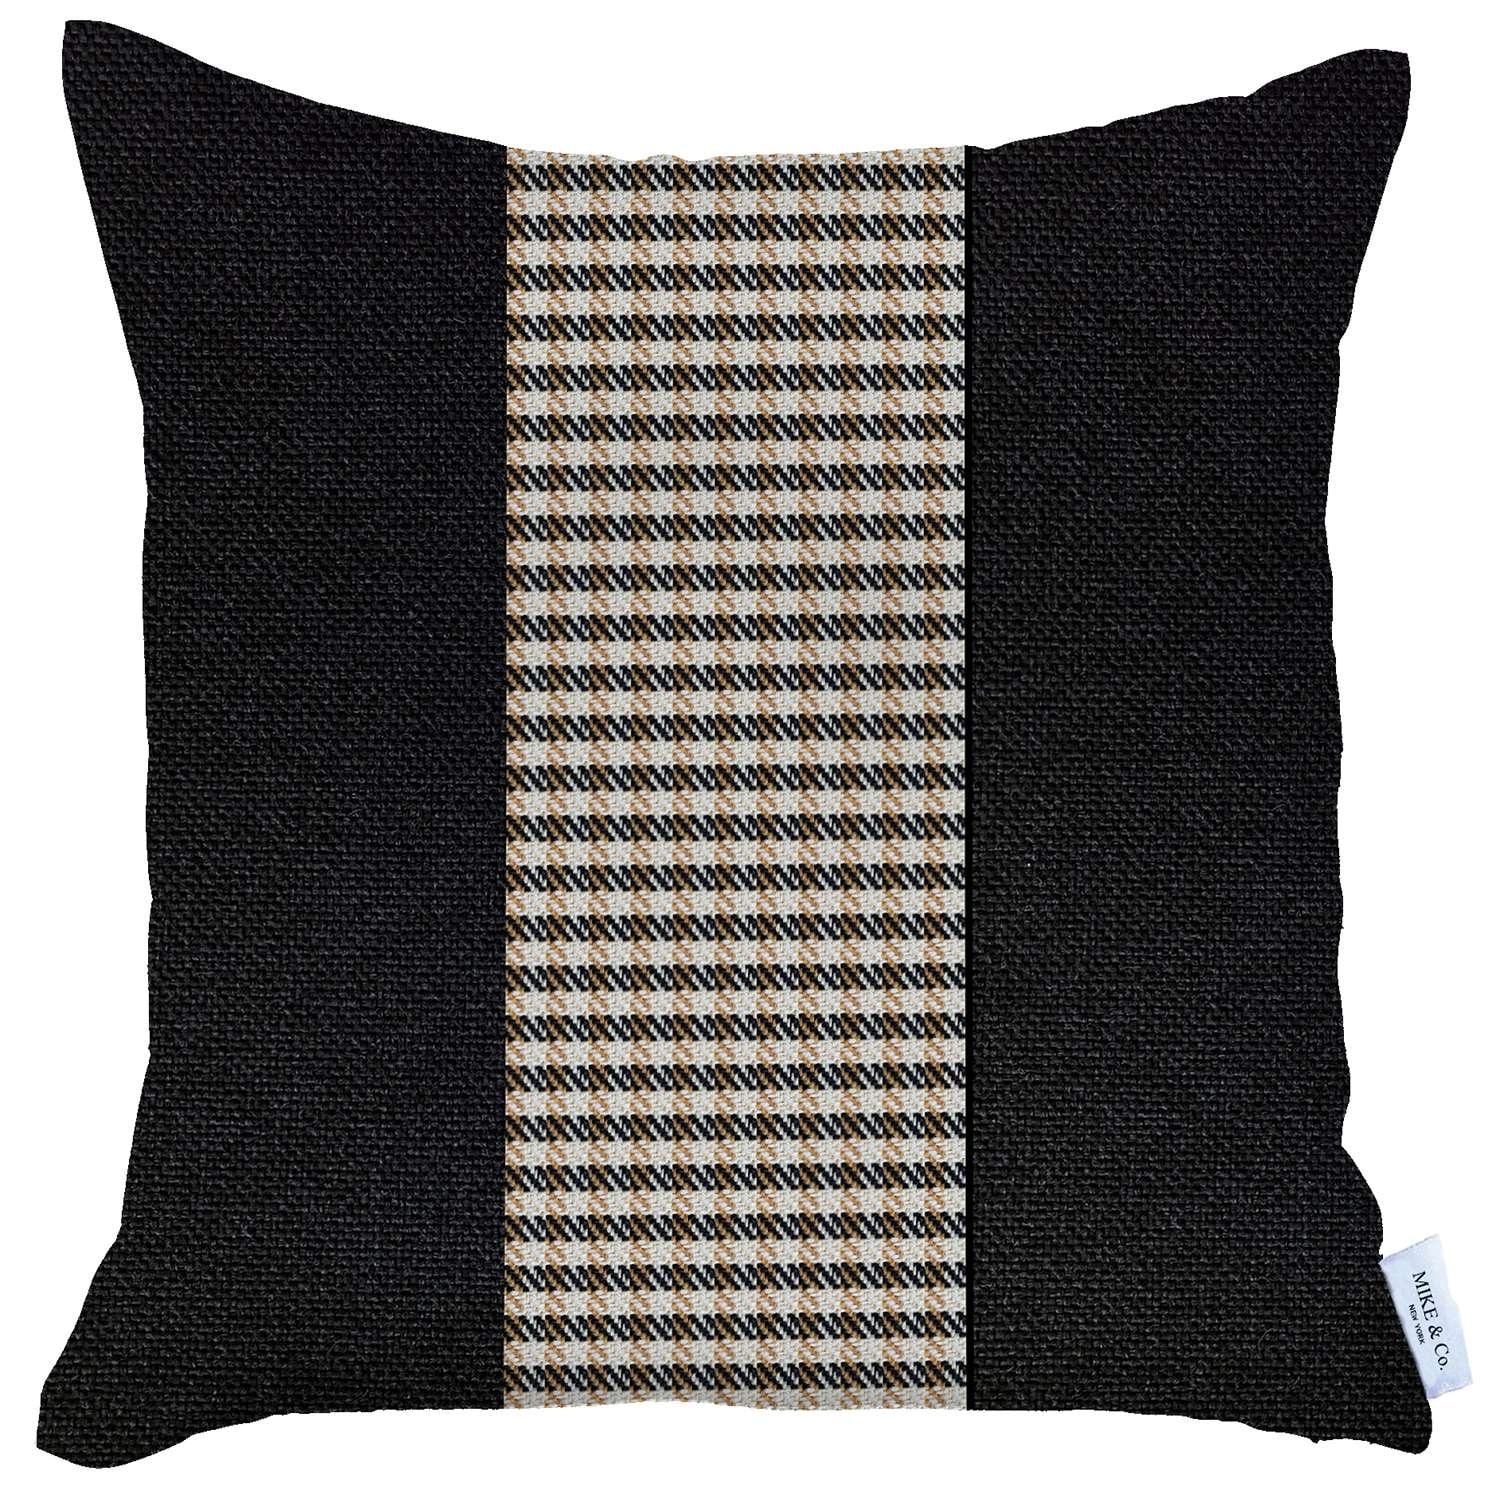 https://ak1.ostkcdn.com/images/products/is/images/direct/3317b79b37bf0236b3b0a3335782318983097b9d/Boho-Chic-Decorative-Houndstooth-Jacquard-Pillow-Covers.jpg